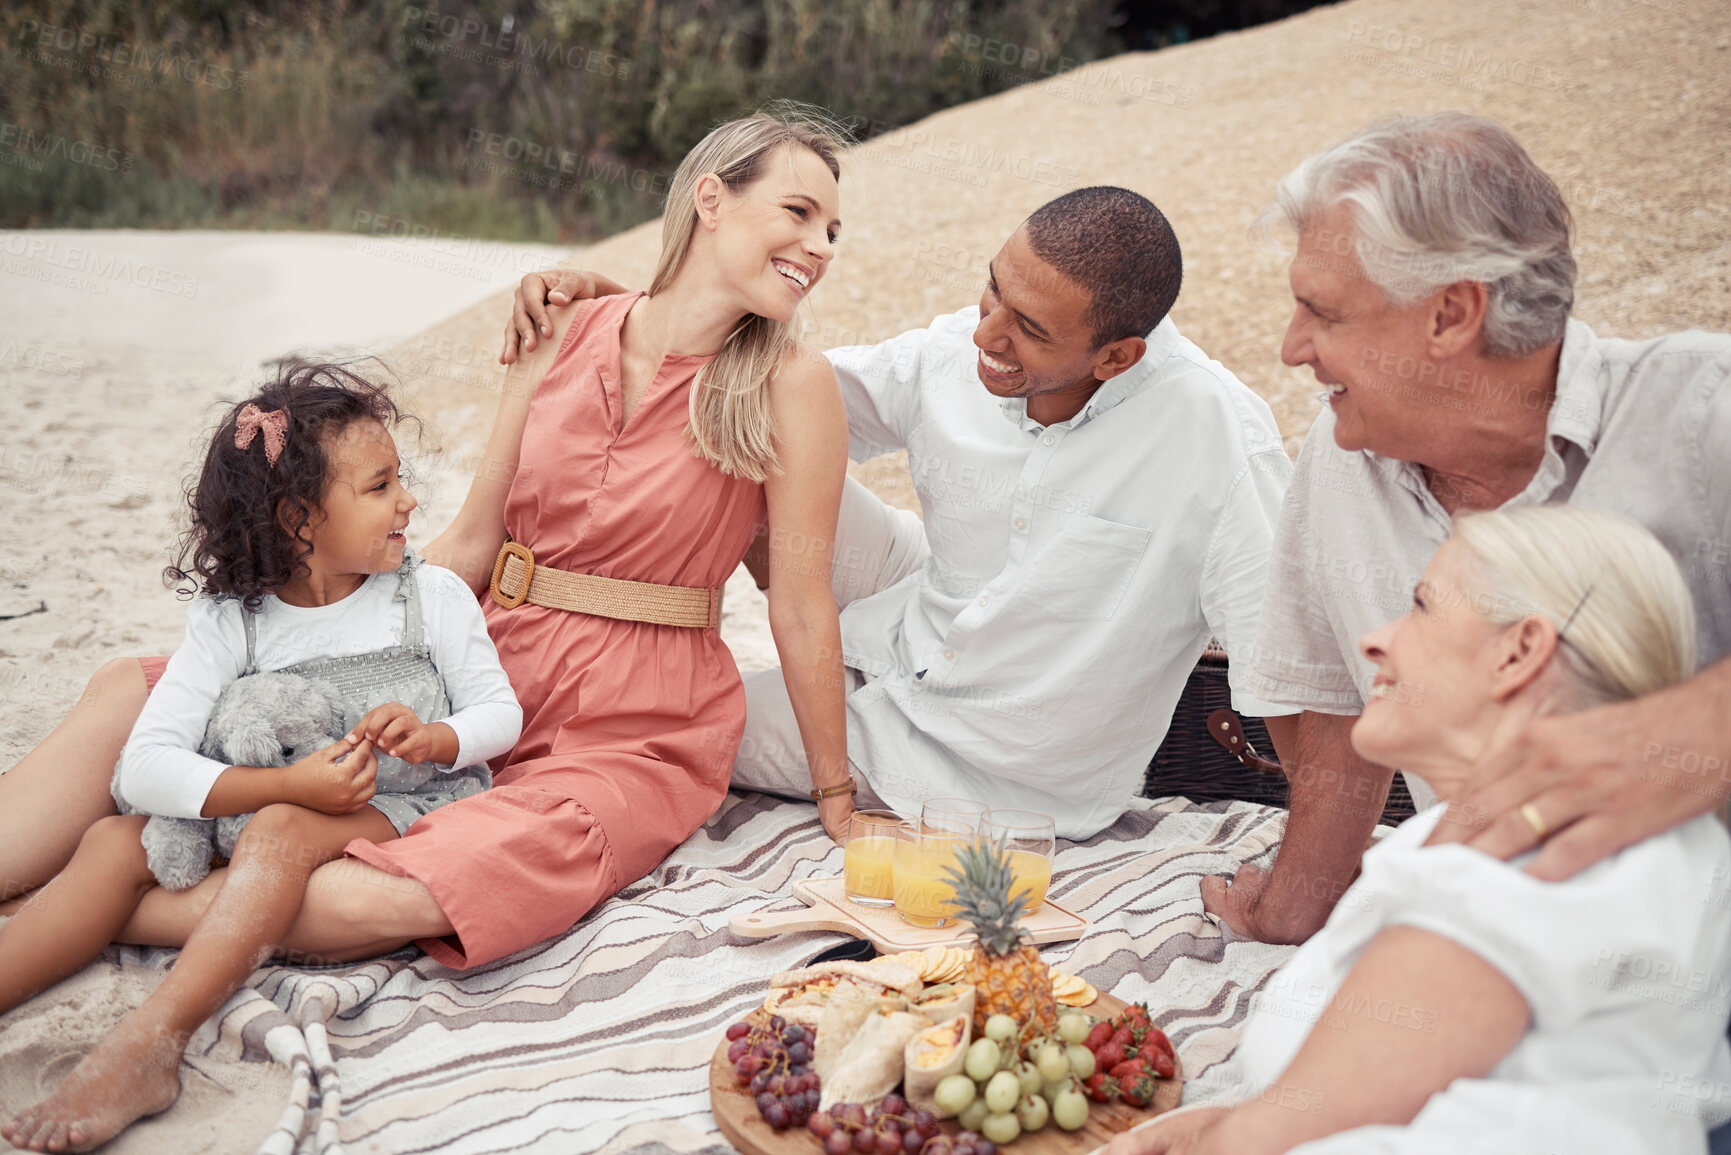 Buy stock photo Interracial couple, girl or family picnic on beach with parents, children or grandparents by sea or ocean in Hawaii. Smile, happy or comic men, women or kids bonding in relax nature reunion with food